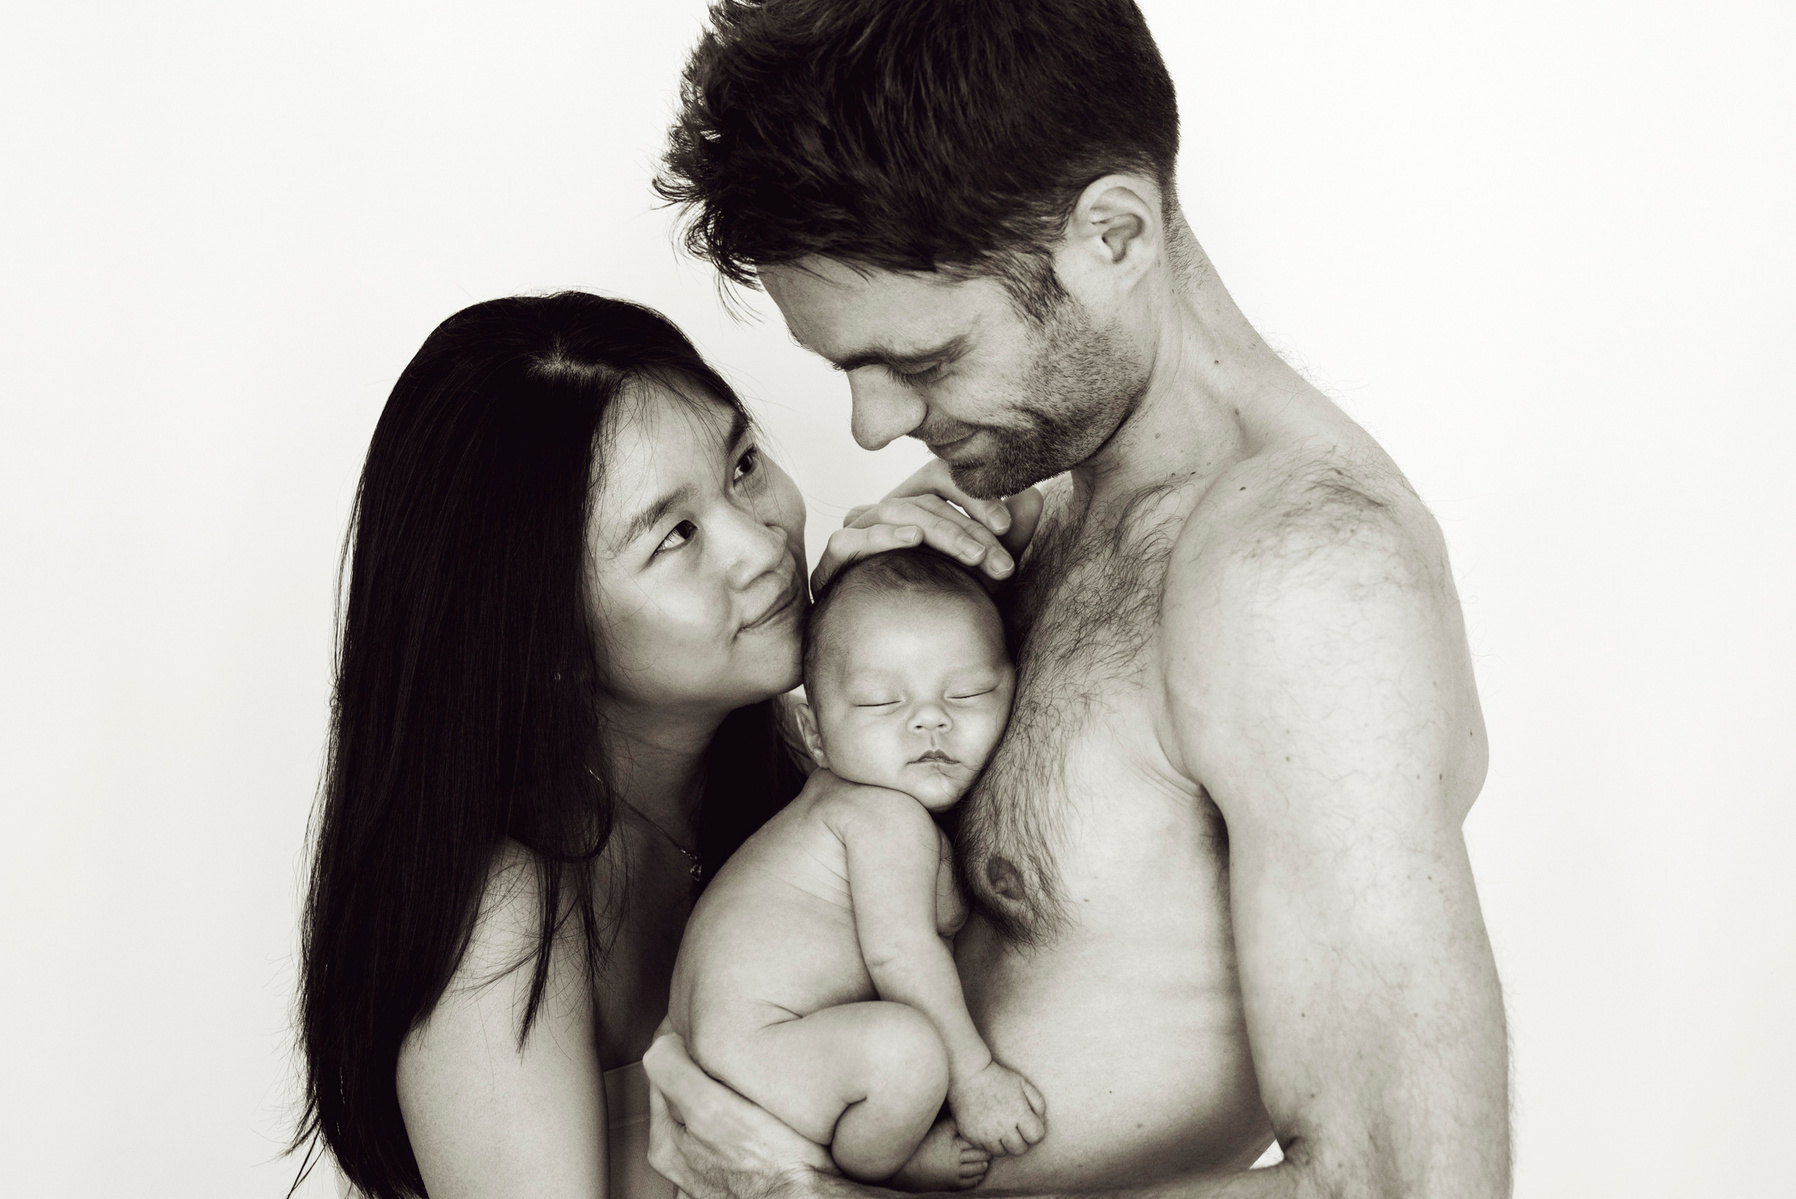 Loving parents look into each other's eyes whilst the father holds his newborn son close to his bare chest for their first professional portrait as a family. Photographed by Geneva's leading portrait photographer, Helen Putsman, based in Chêne-Bougeries.